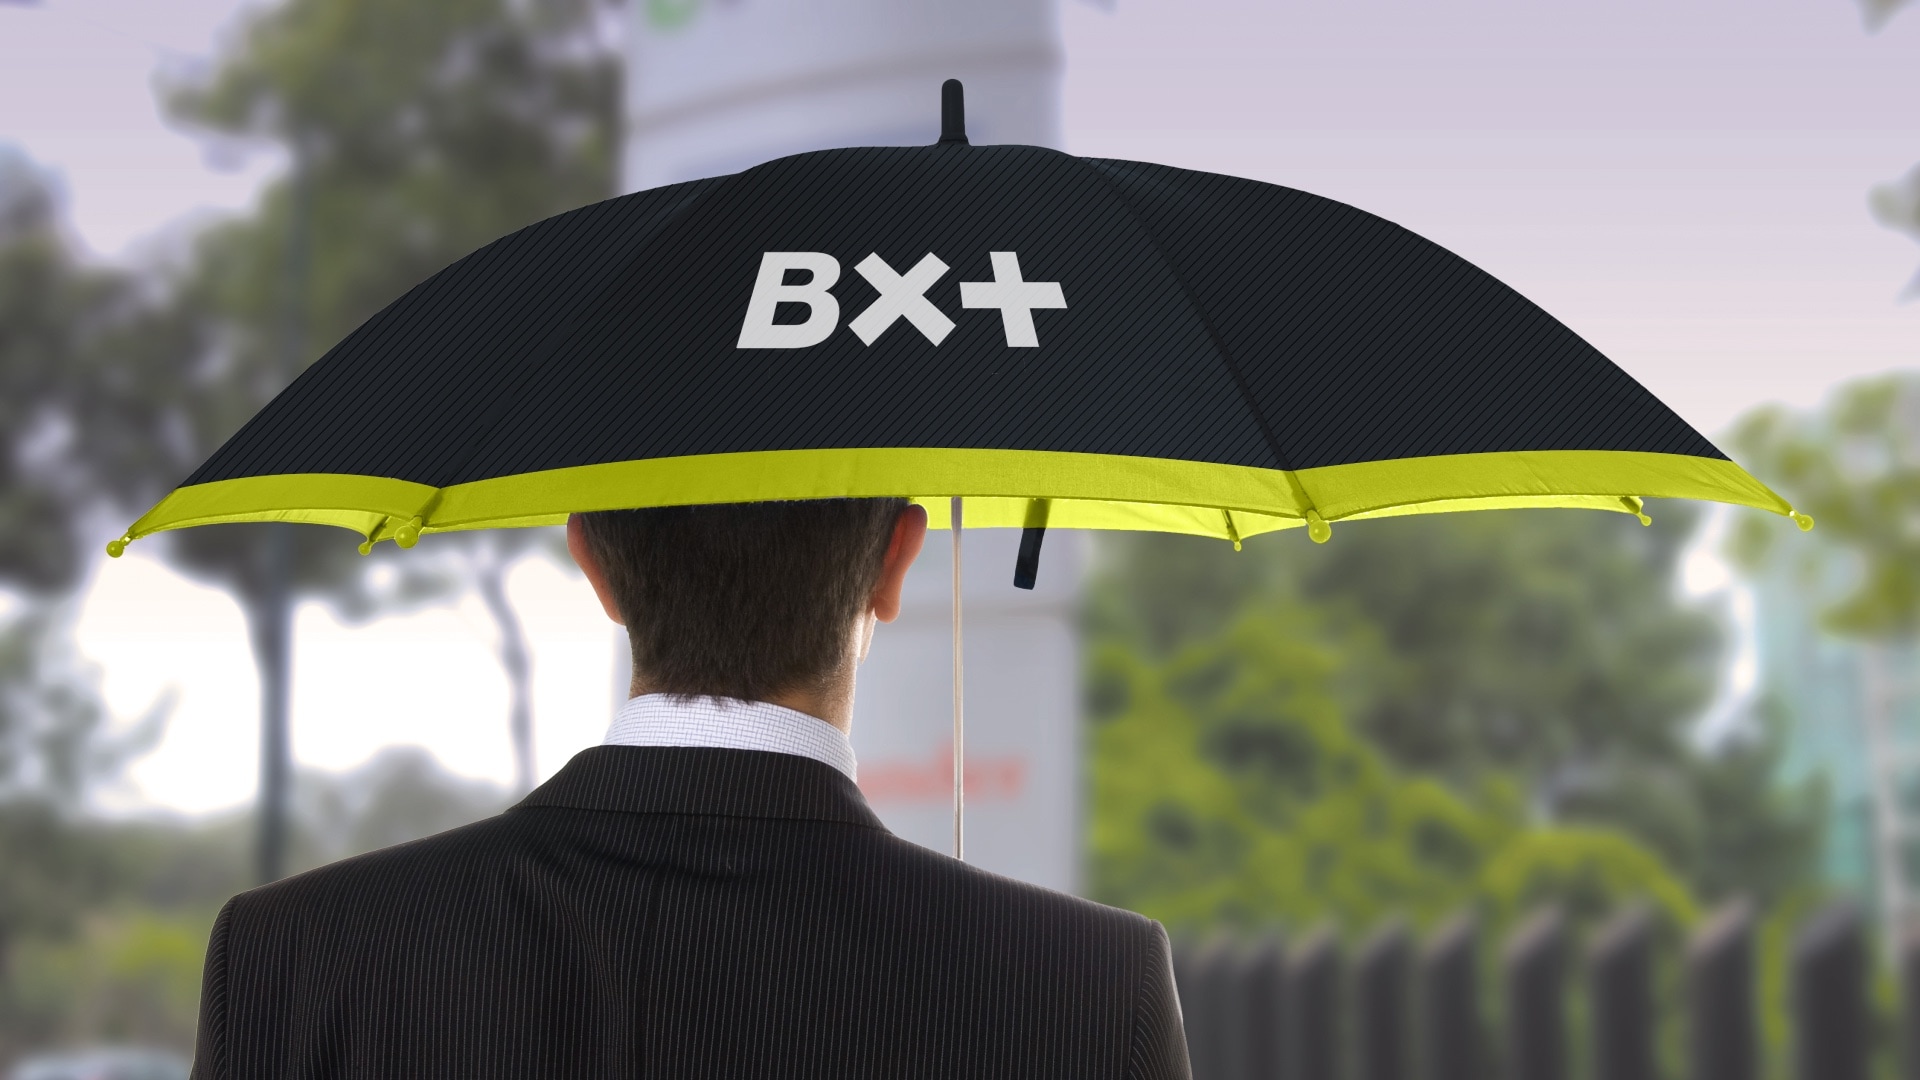 a man standing with a black umbrella with the BX+ logo.